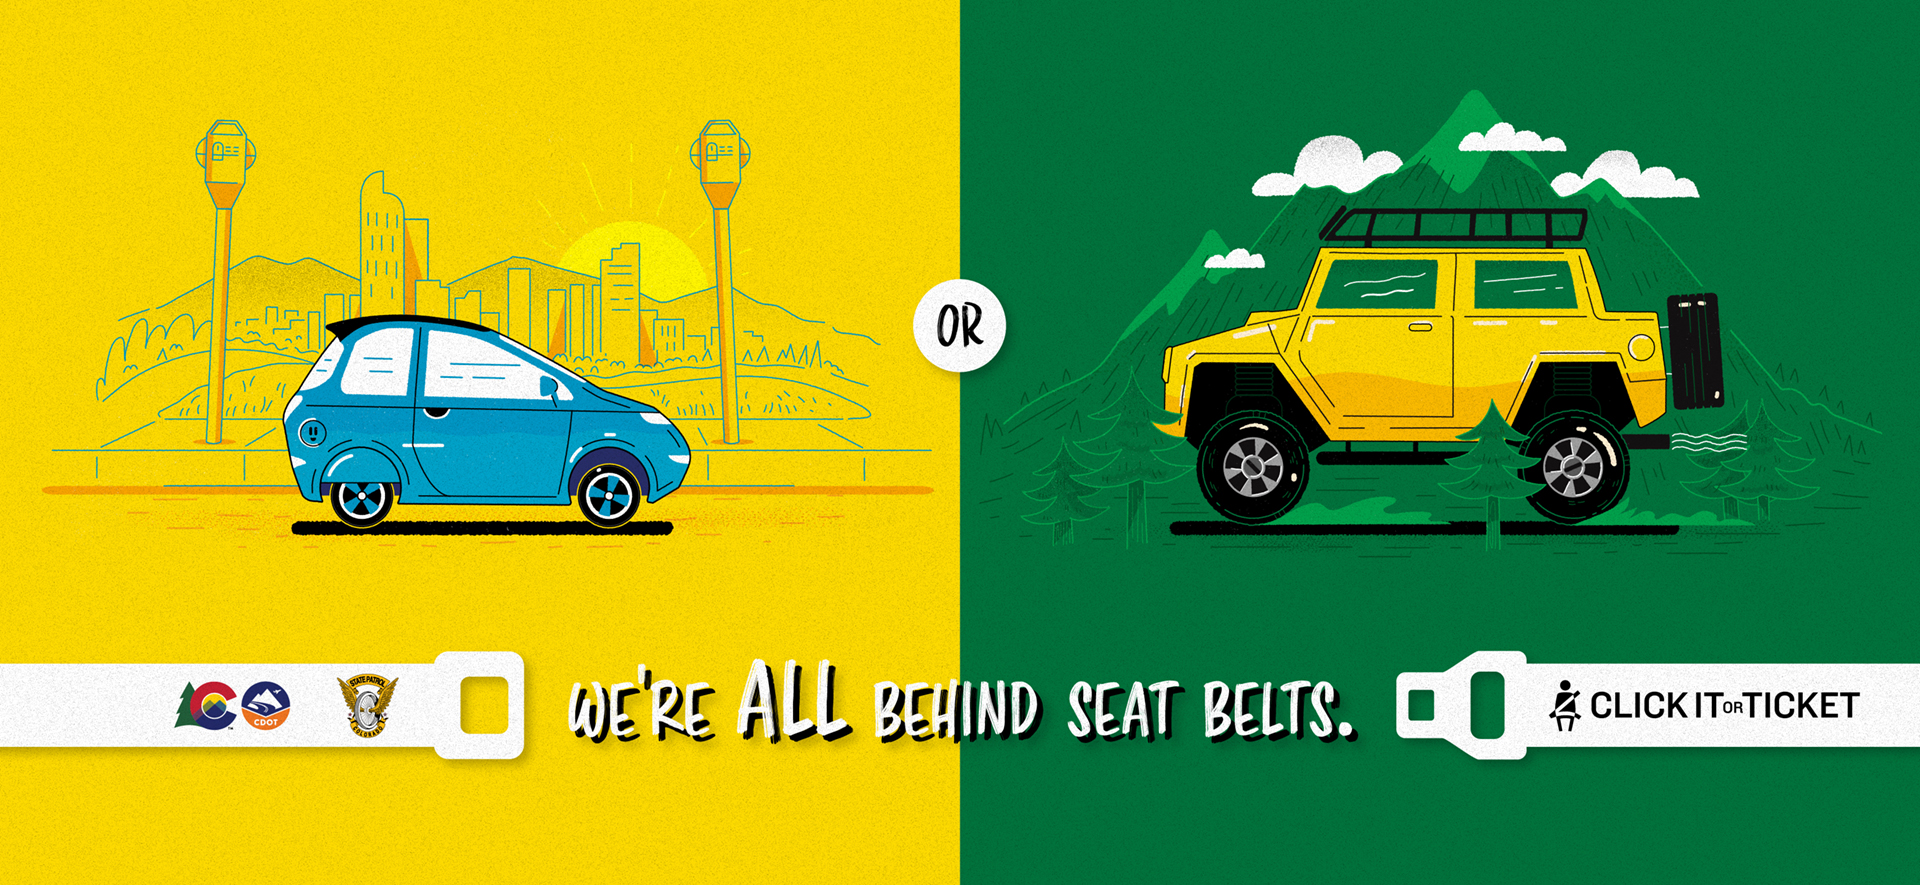 We're All Behind Seat Belts - Vehicles detail image